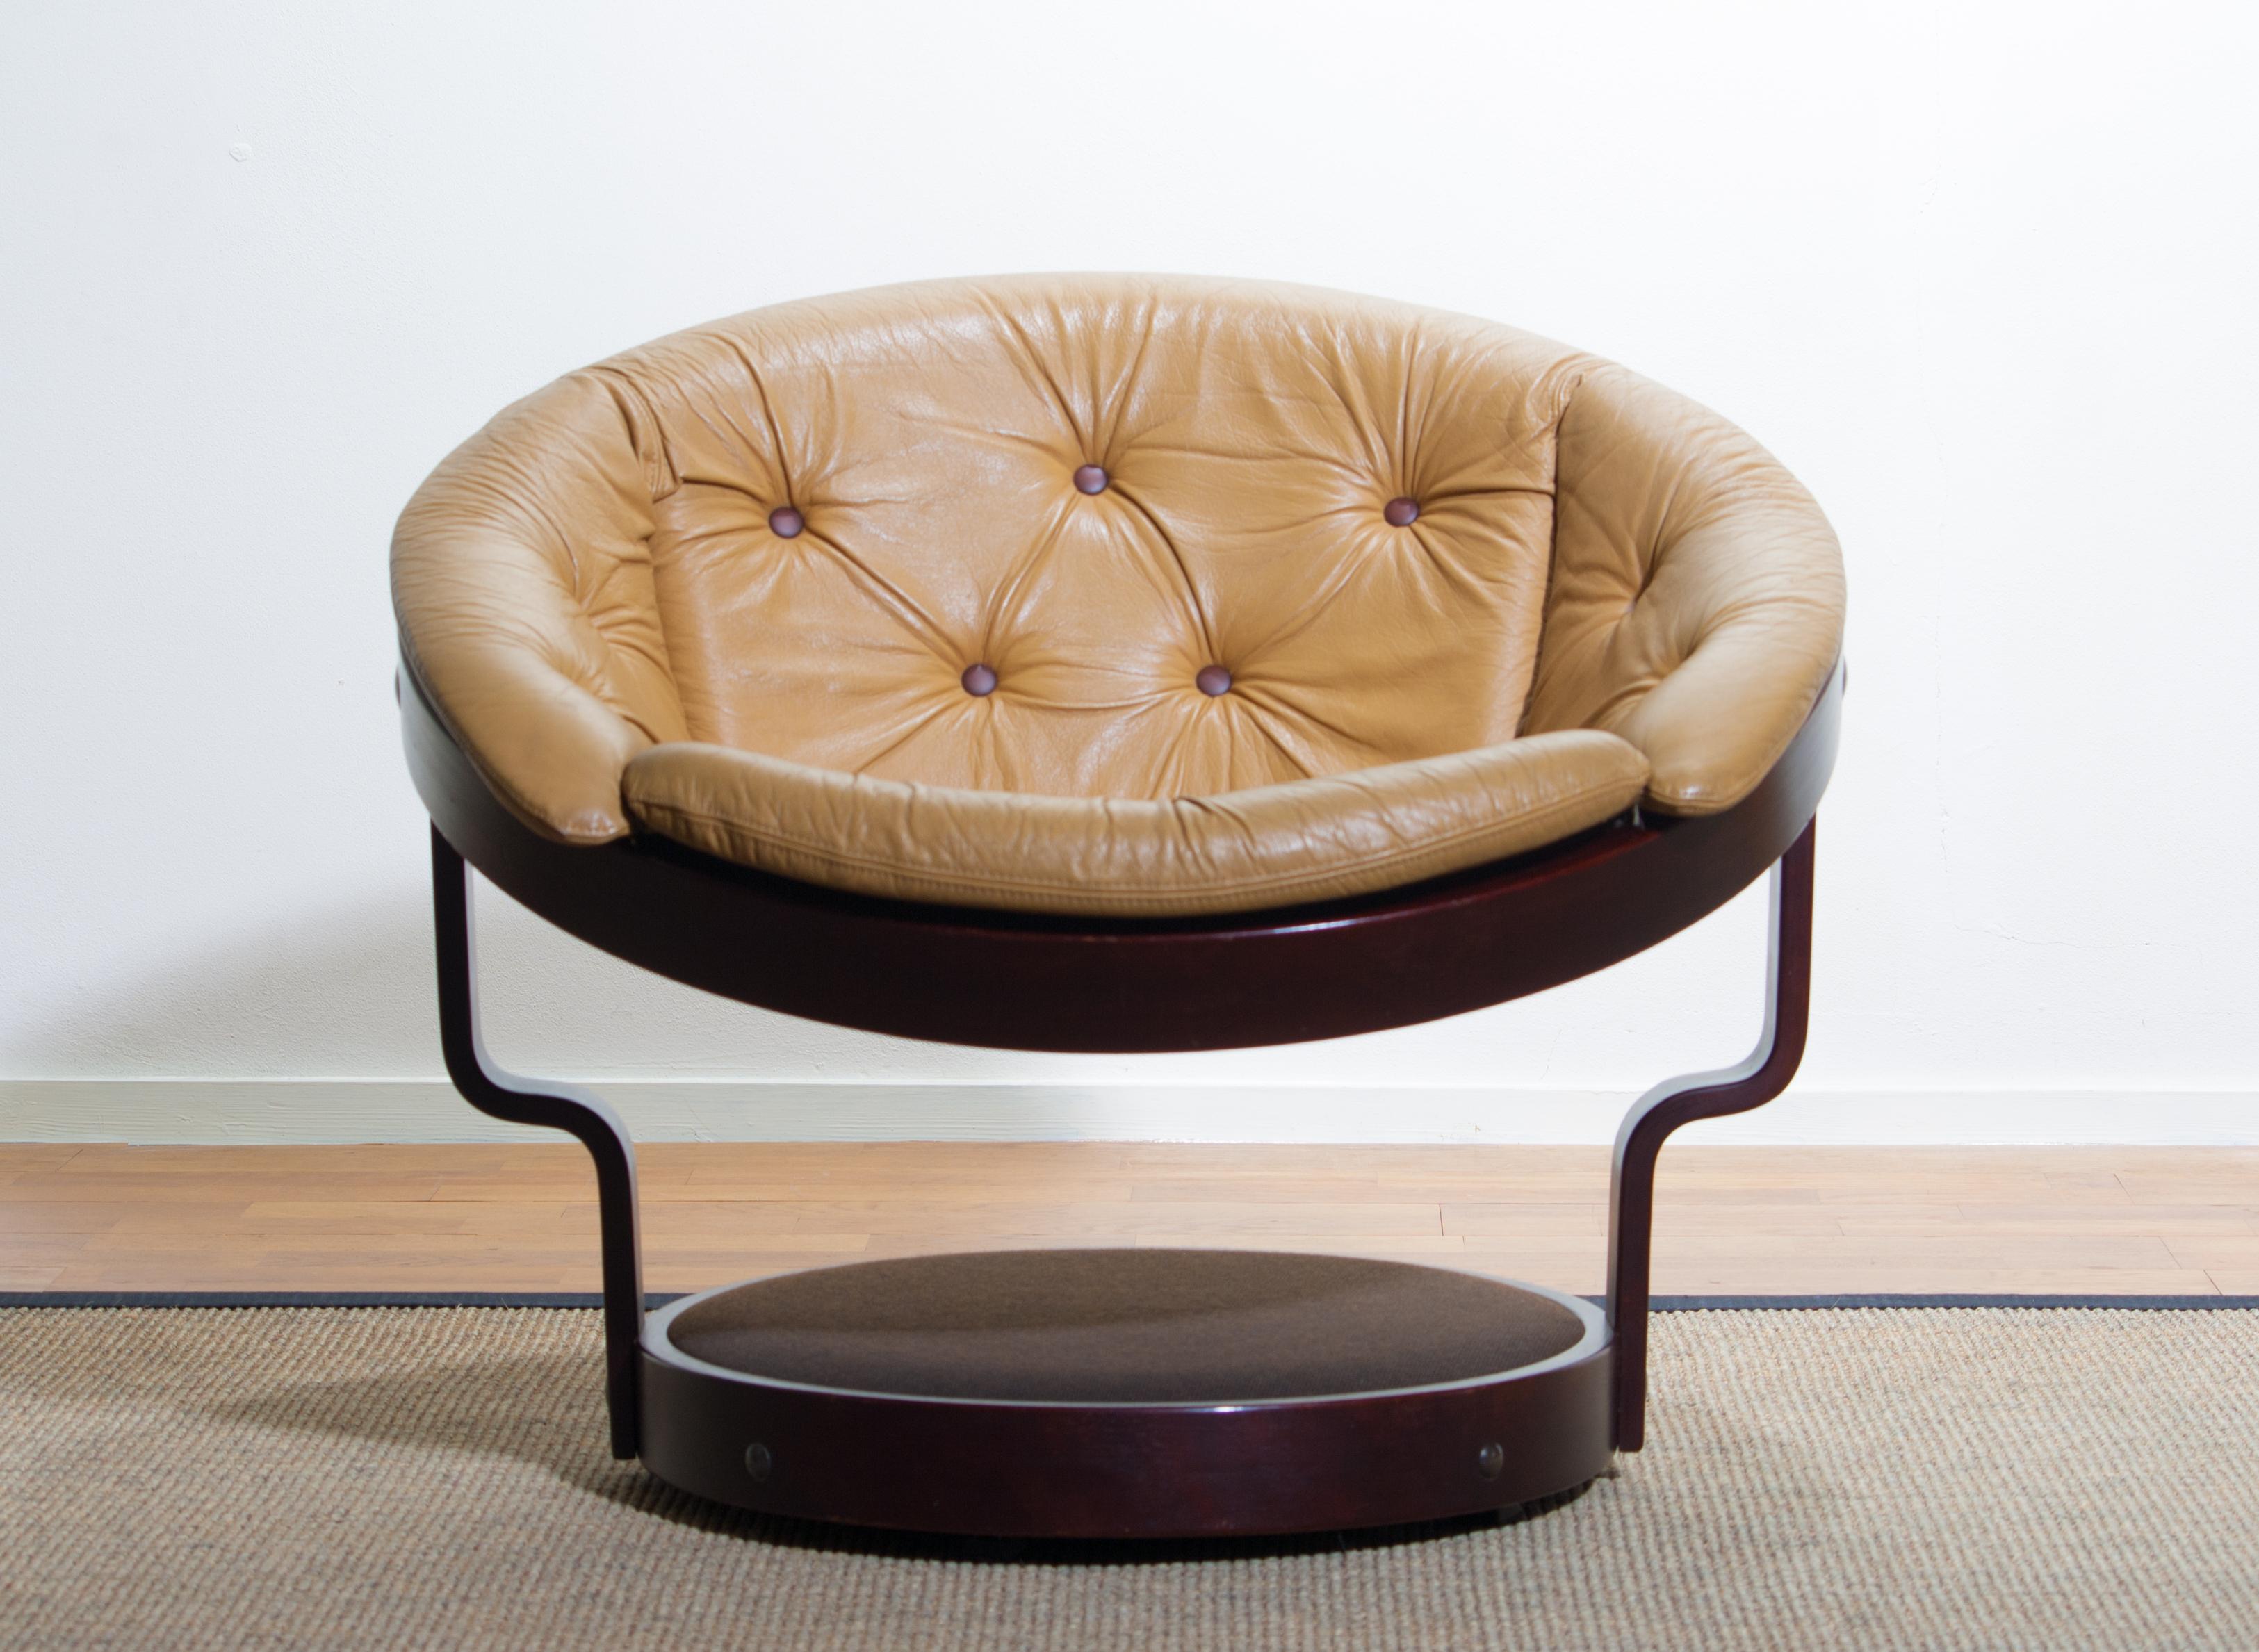 1970s Scandinavian Circle Shaped Swivel Chair by Oddmund Vad in Camel Leather 1